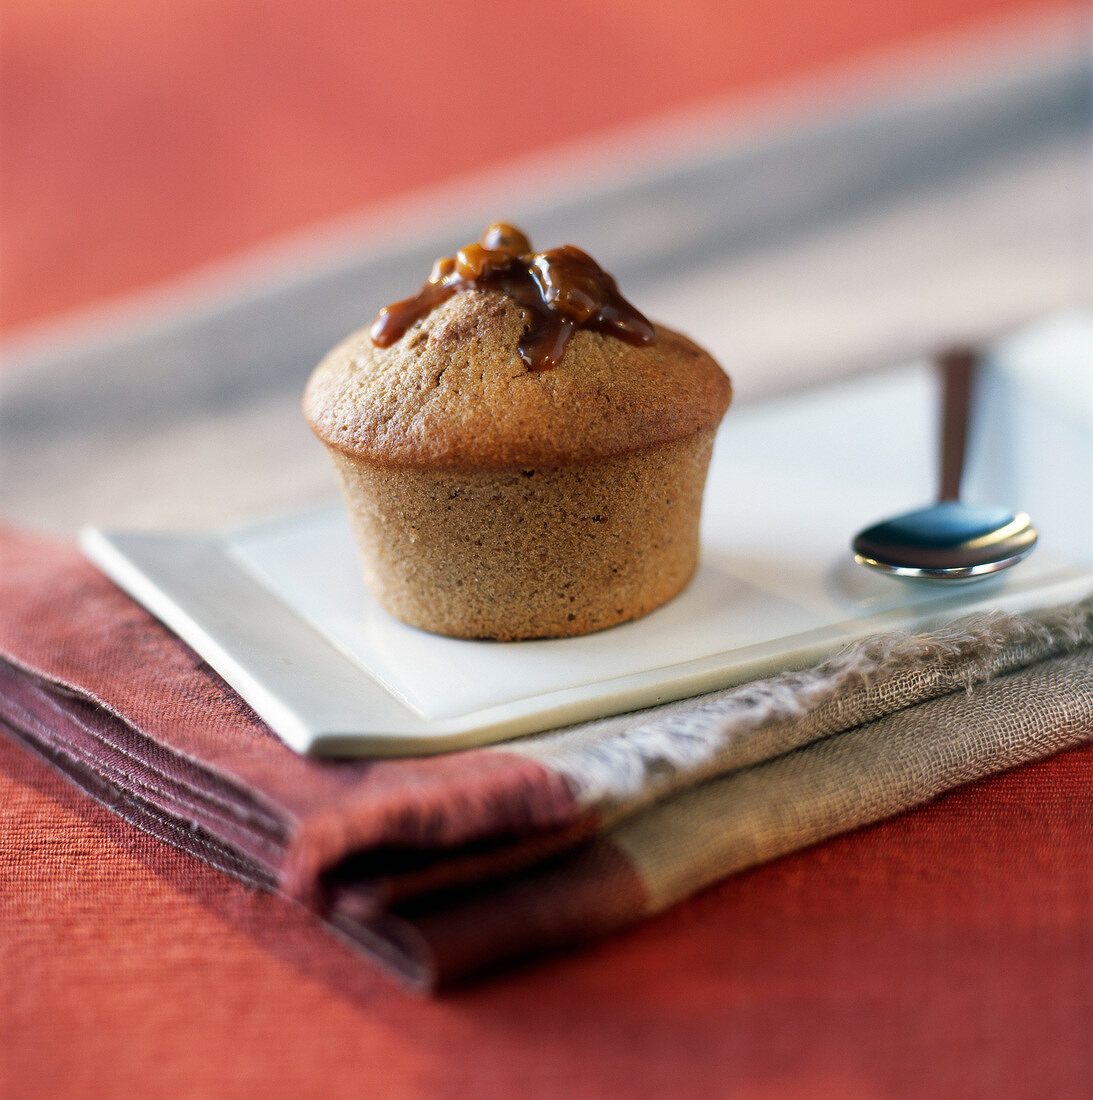 Chestnut muffin filled with walnuts